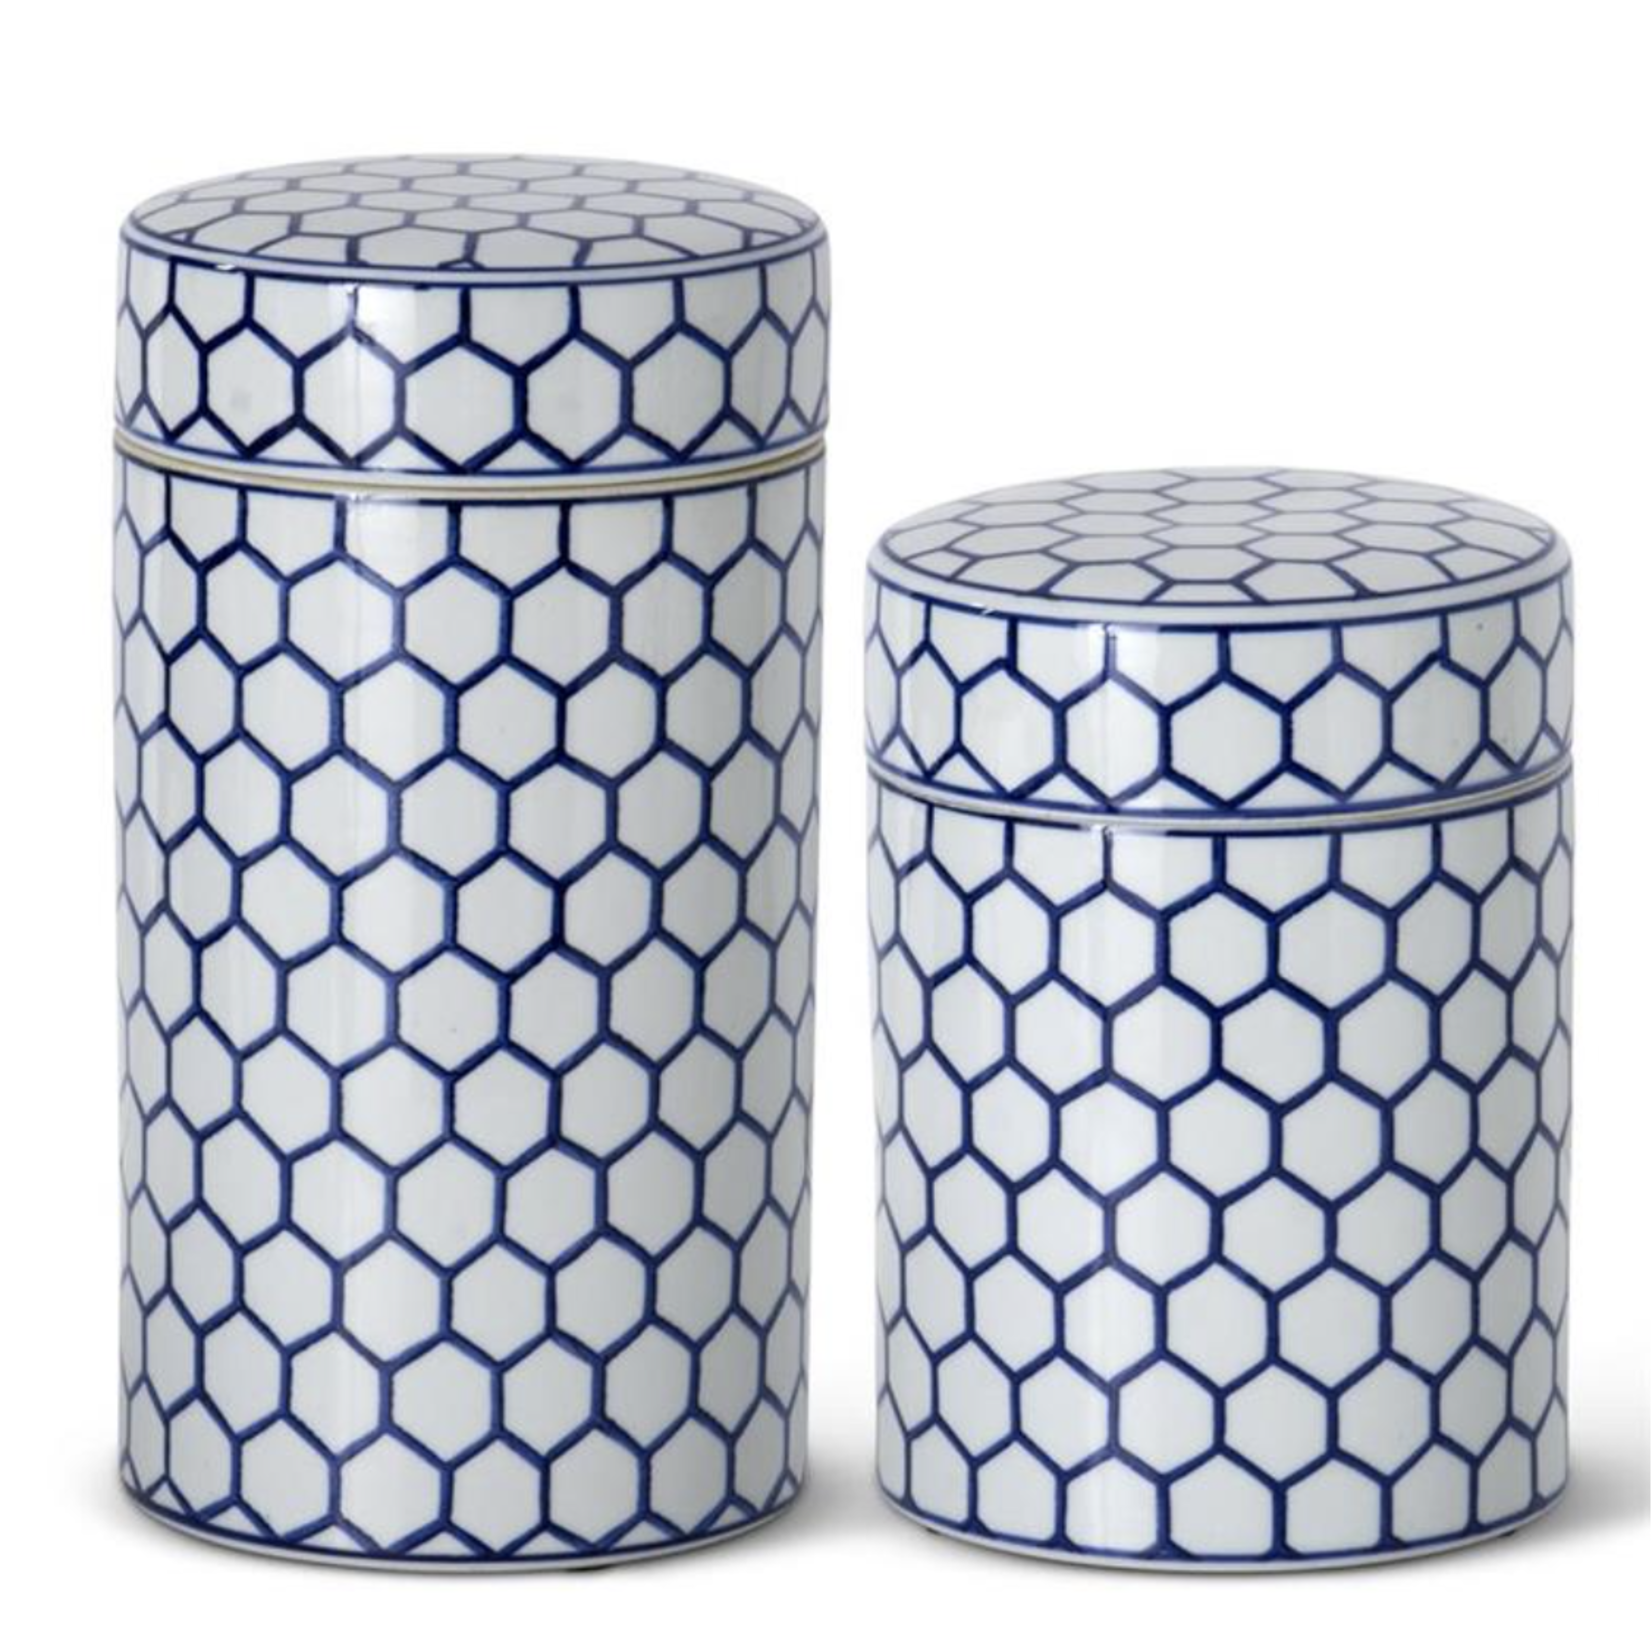 Outside The Box Set Of 2 Blue & White Honeycomb Ceramic Round Containers With Lids